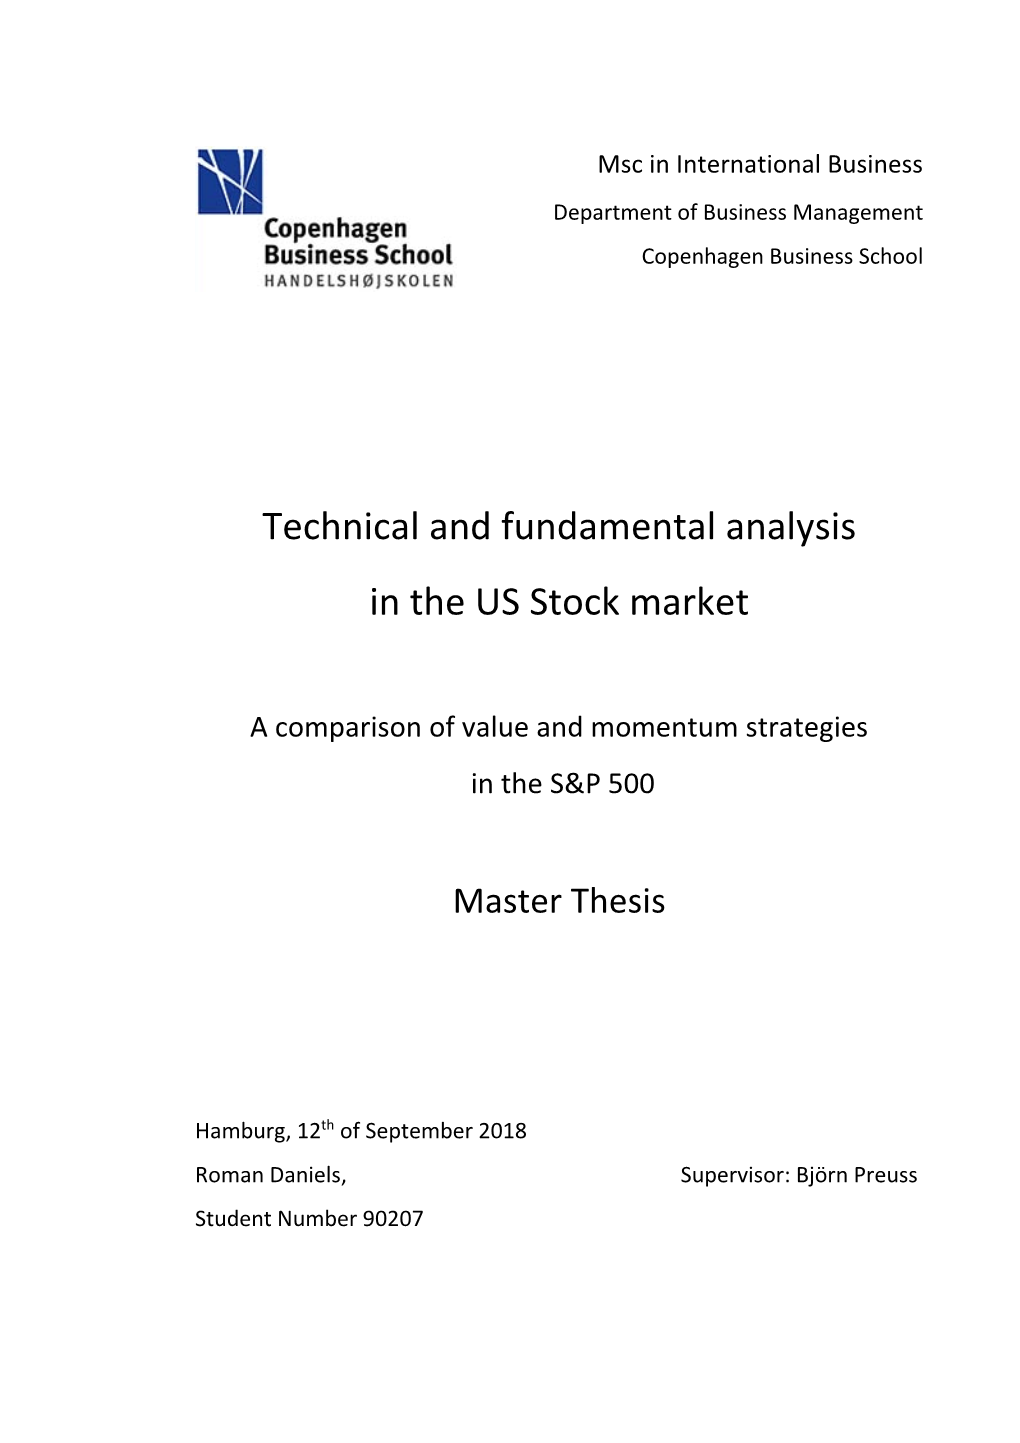 Technical and Fundamental Analysis in the US Stock Market